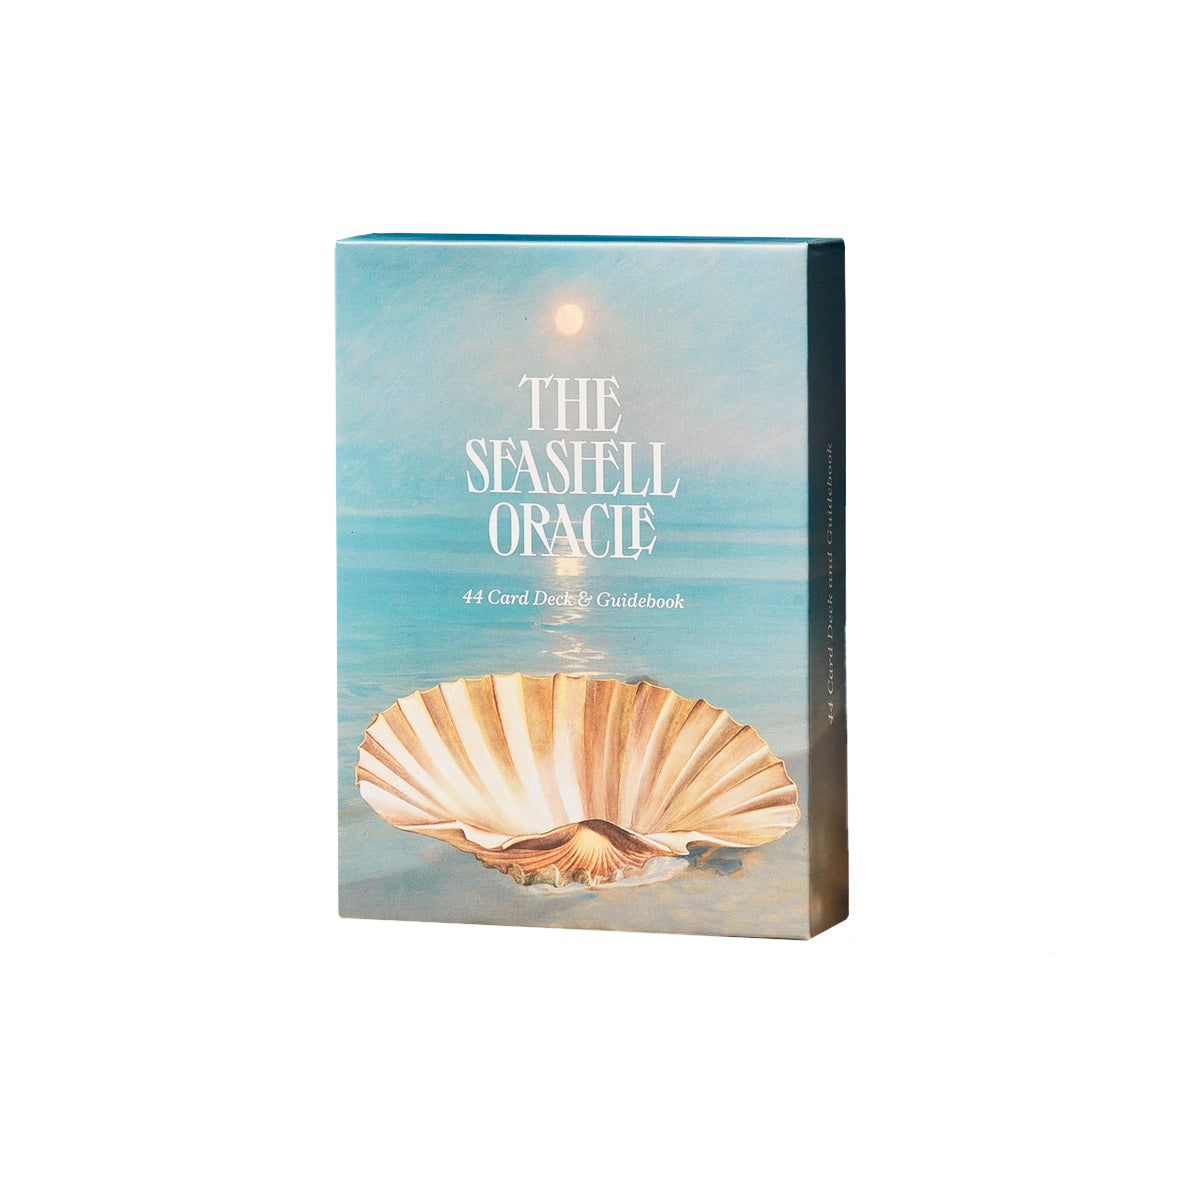 The Seashell Oracle: 44 Card Deck & Guidebook - Broccoli